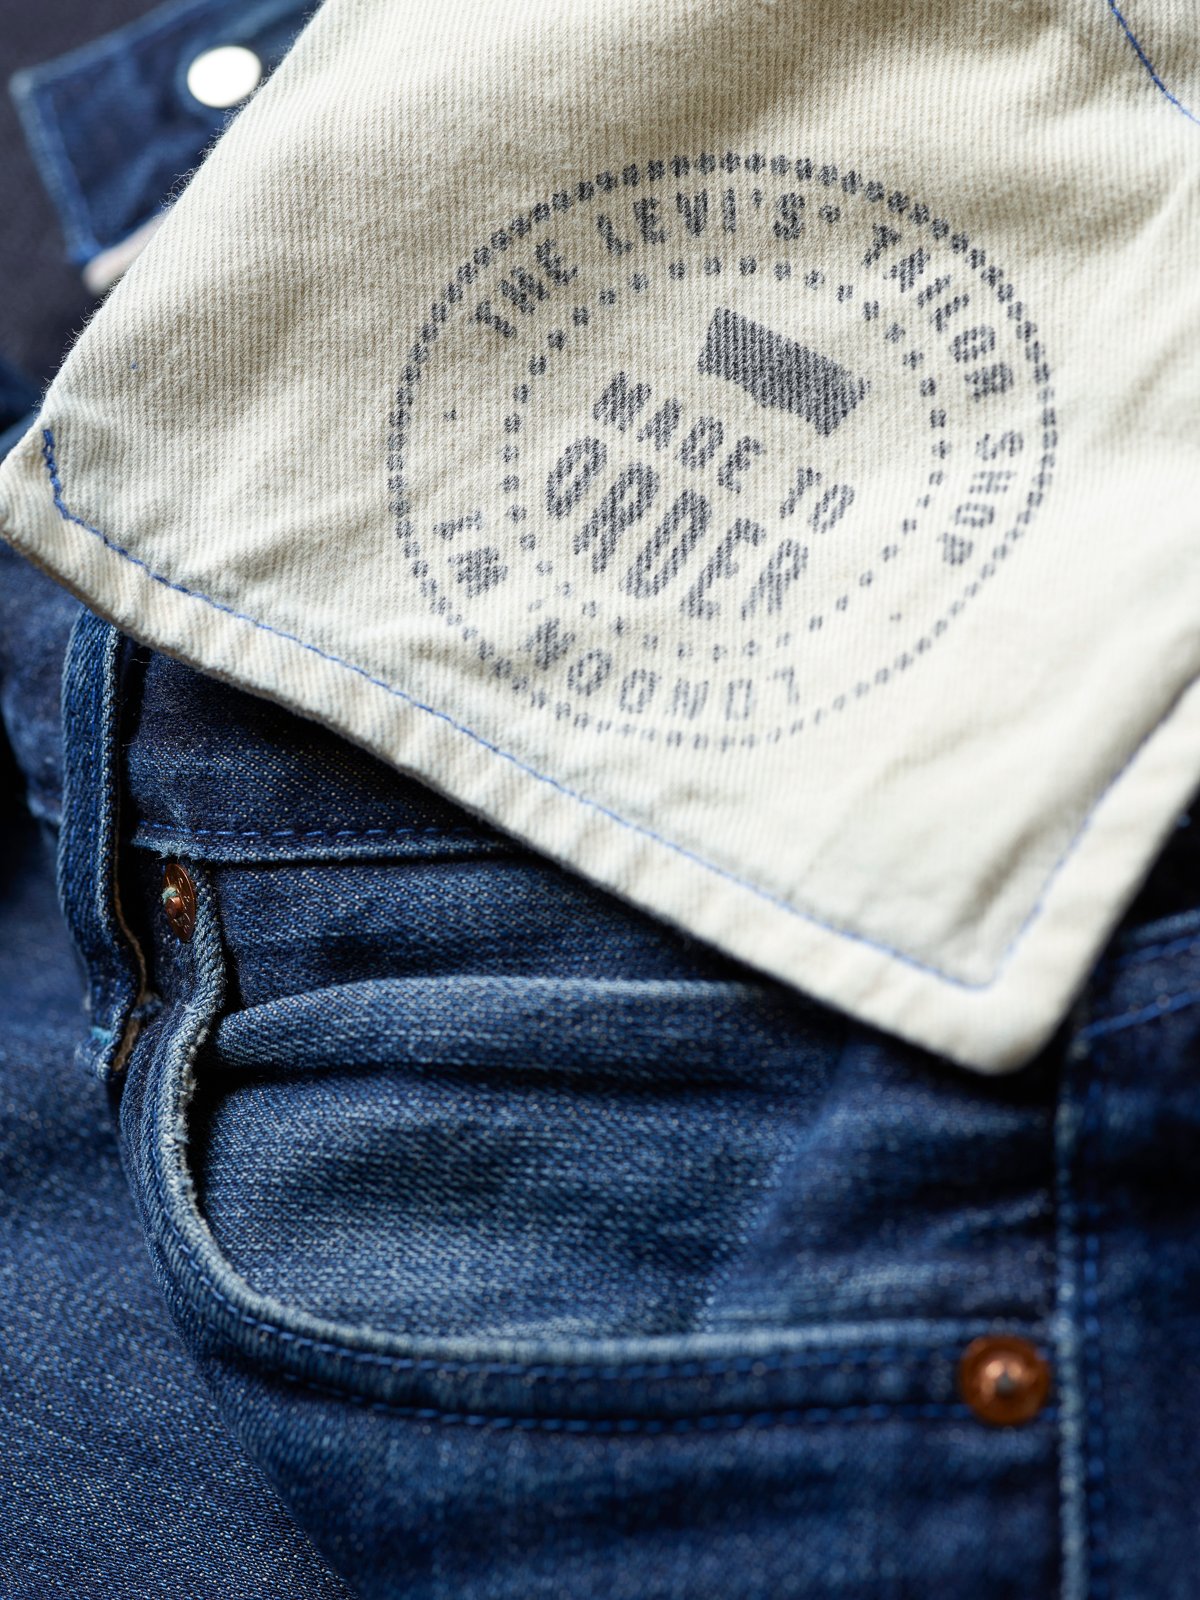 Levi's bespoke jeans – Update and 501st pair – Permanent Style